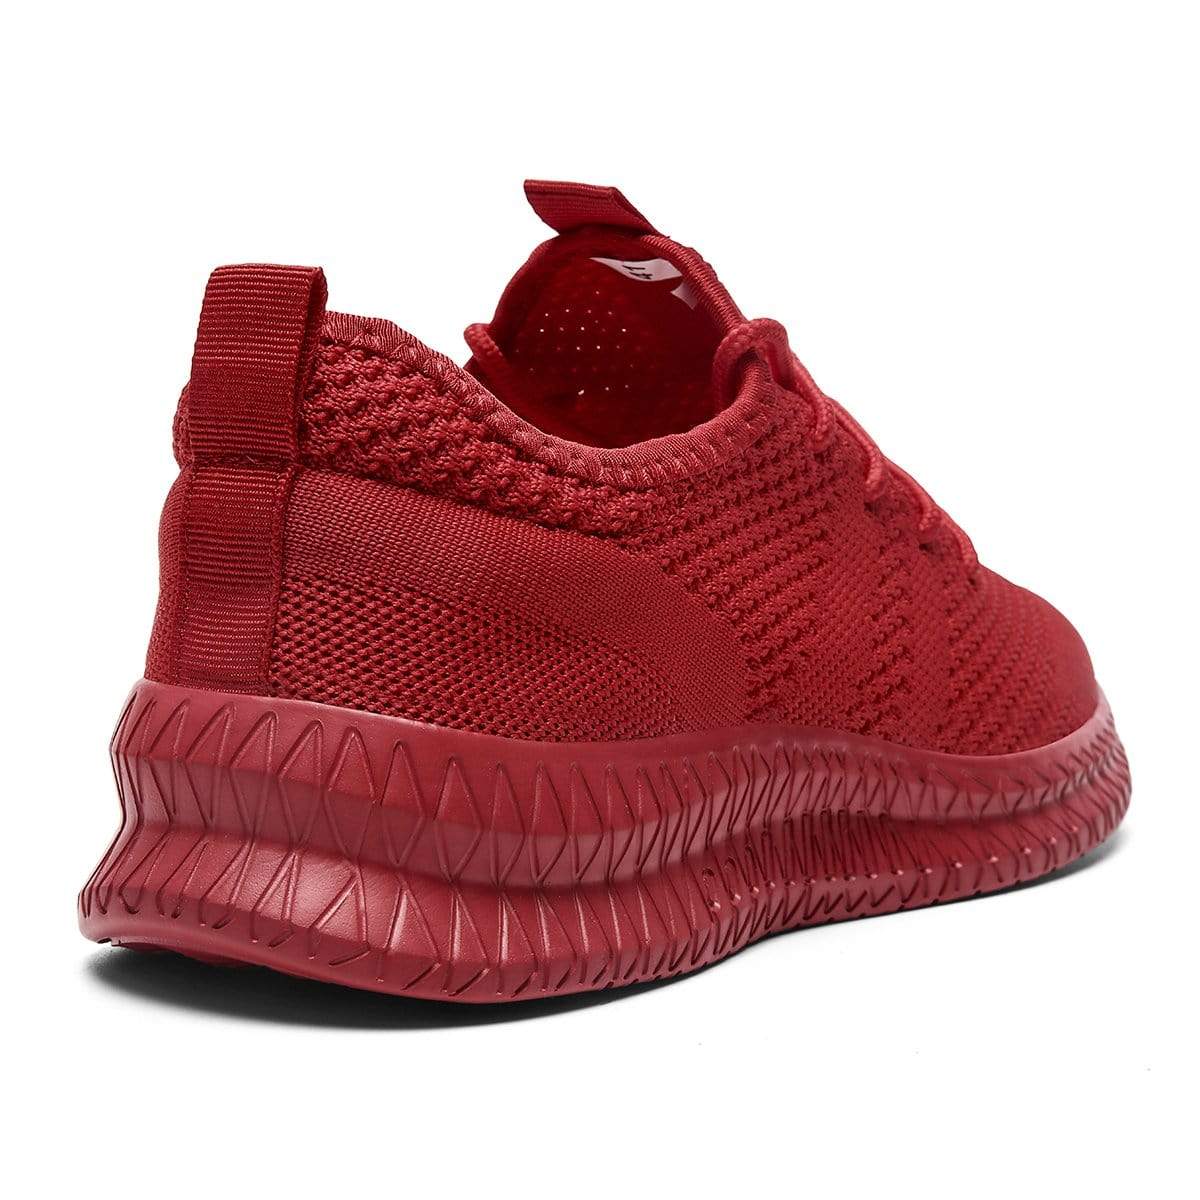 Damyuan Casual Shoes Men Mesh Breathable Comfortable Lace-up Sports Shoes Outdoor Red Tennis Sneakers